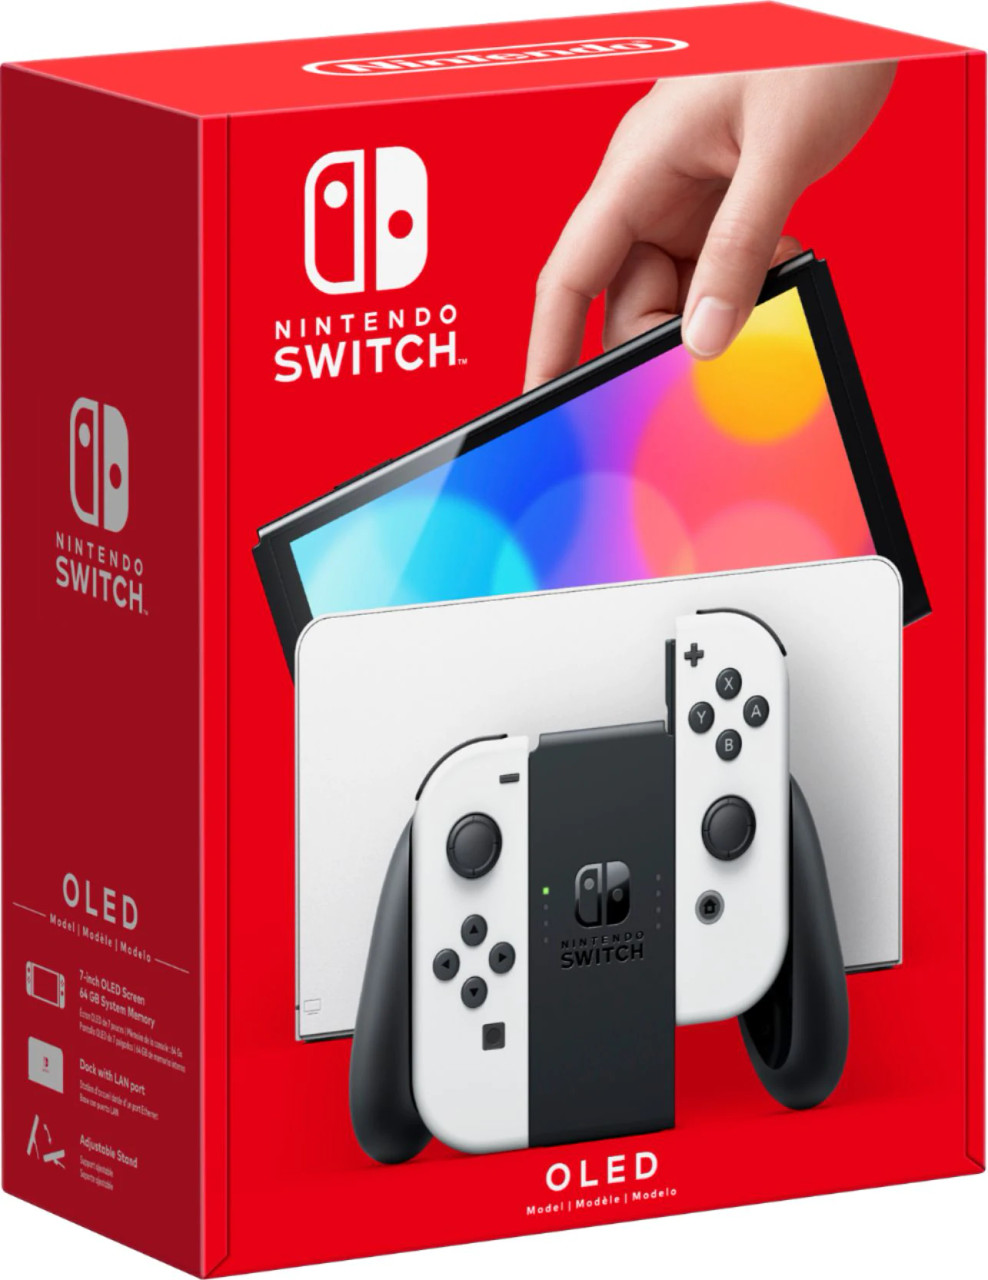 Nintendo Switch OLED Model | Buy Online At Best Price | Mojo Computers